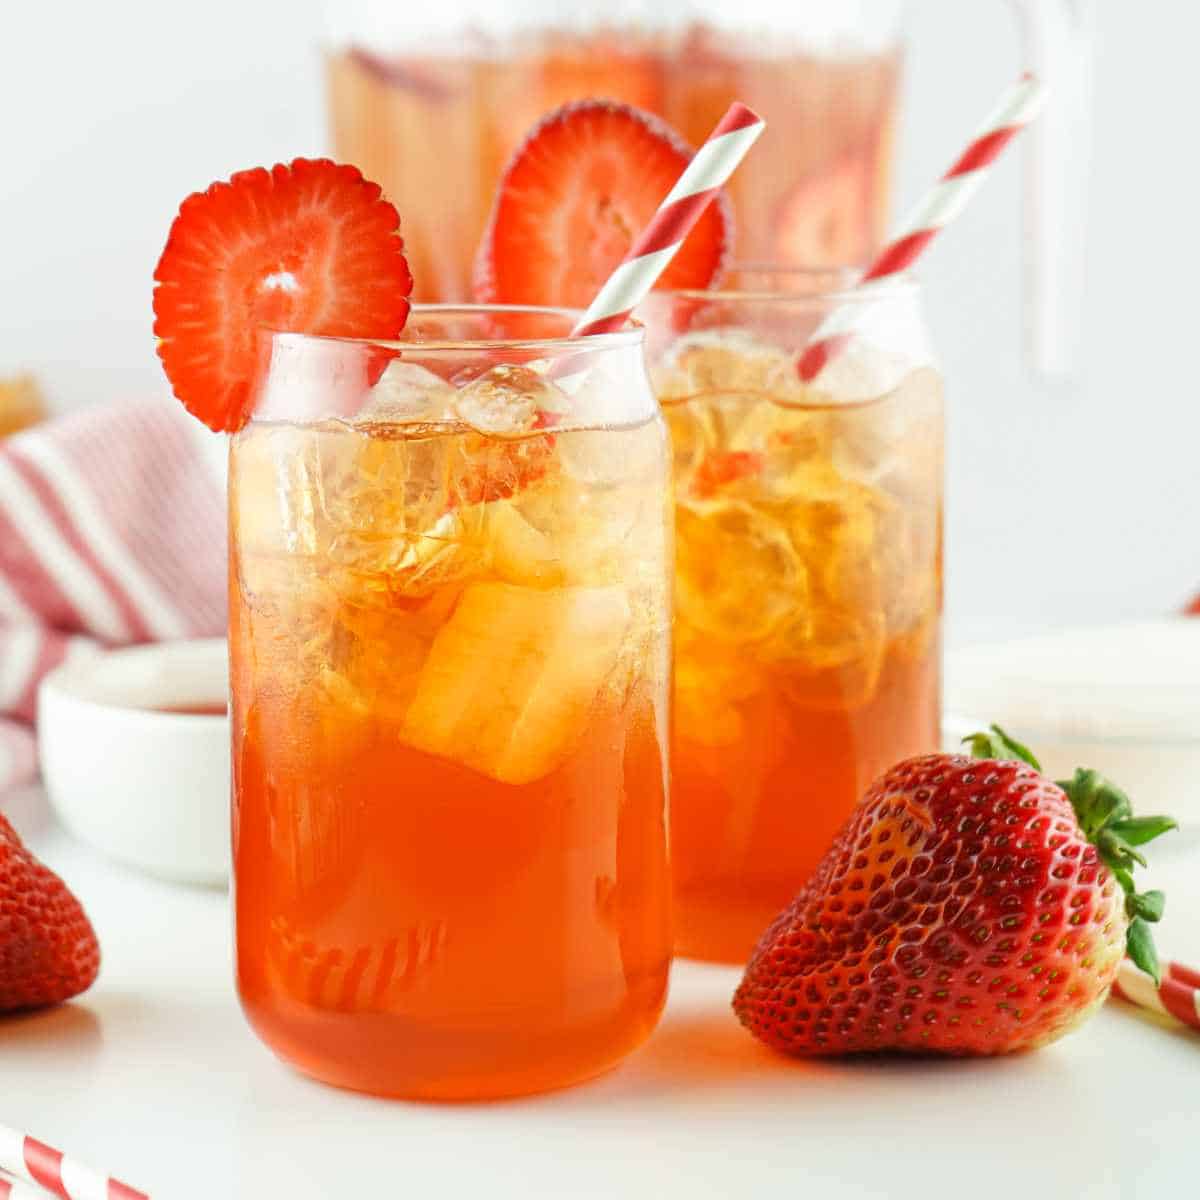 glass and pitcher of strawberry Arnold Palmer iced tea.